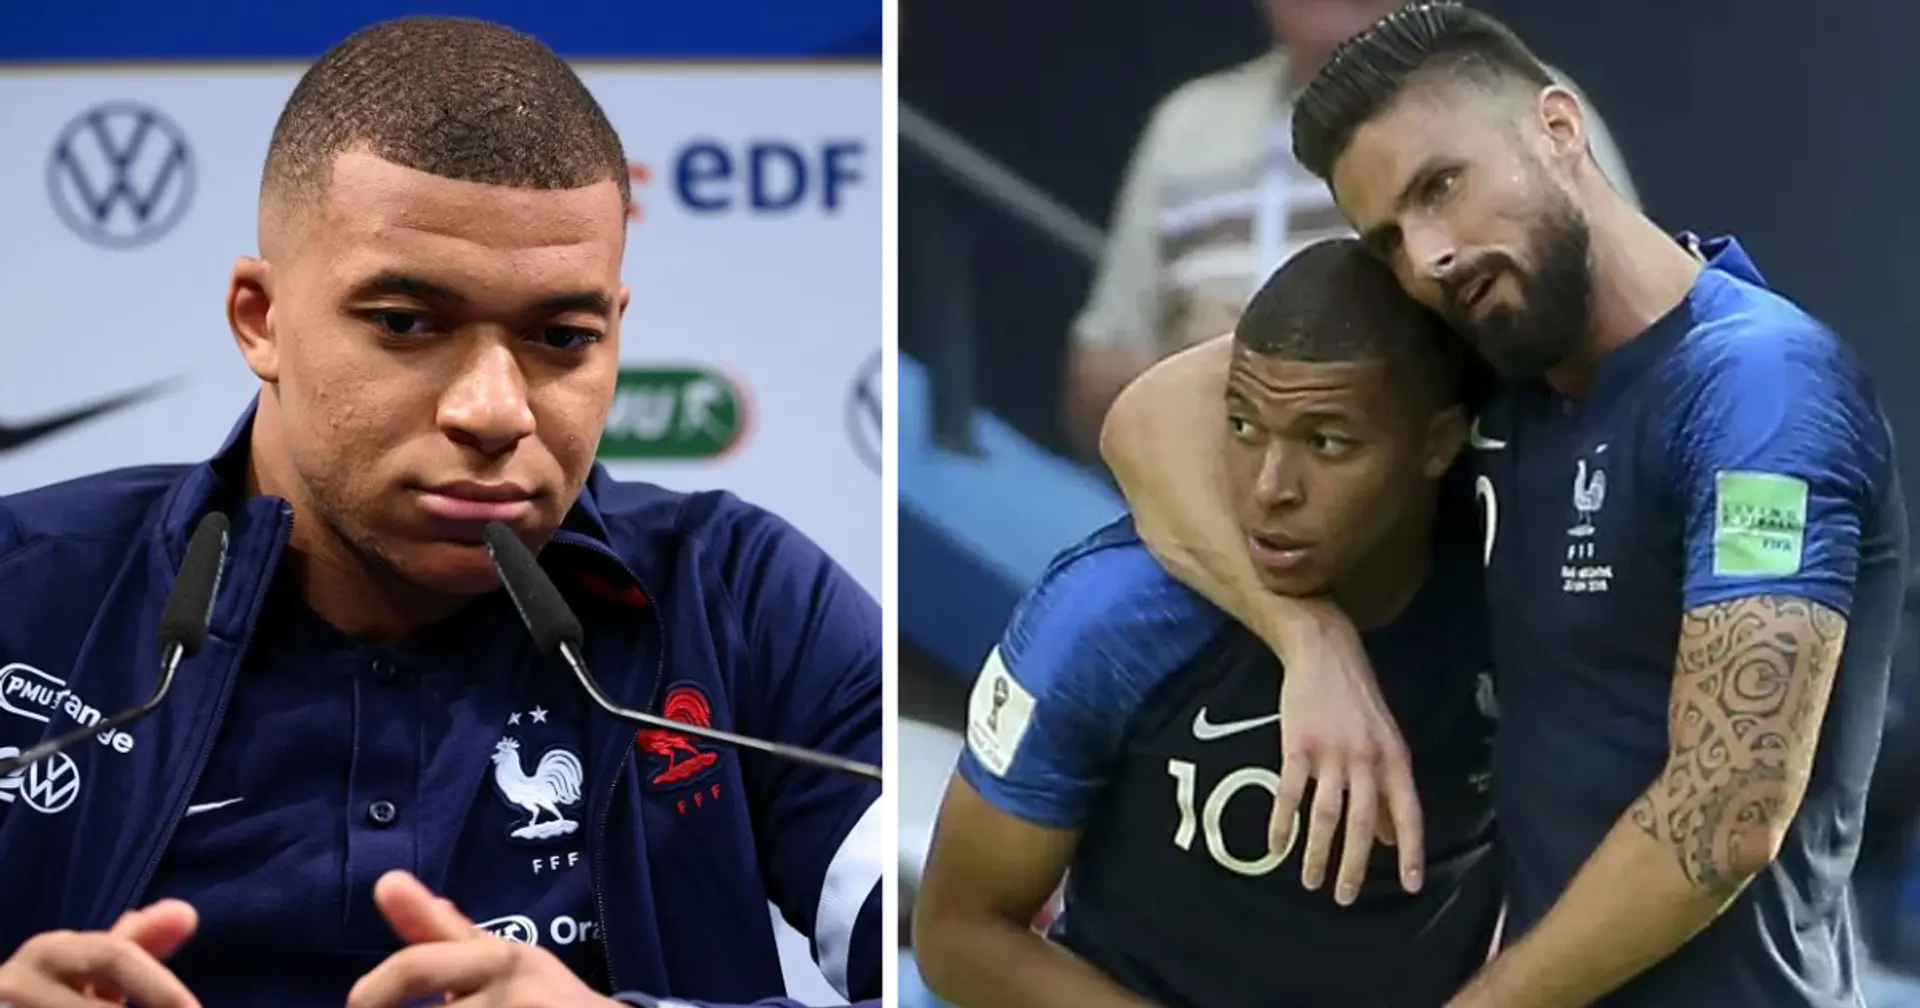 'I don't have a problem, I'll welcome him with open arms': Mbappe 'ends' Euro feud with ex-Blue Giroud